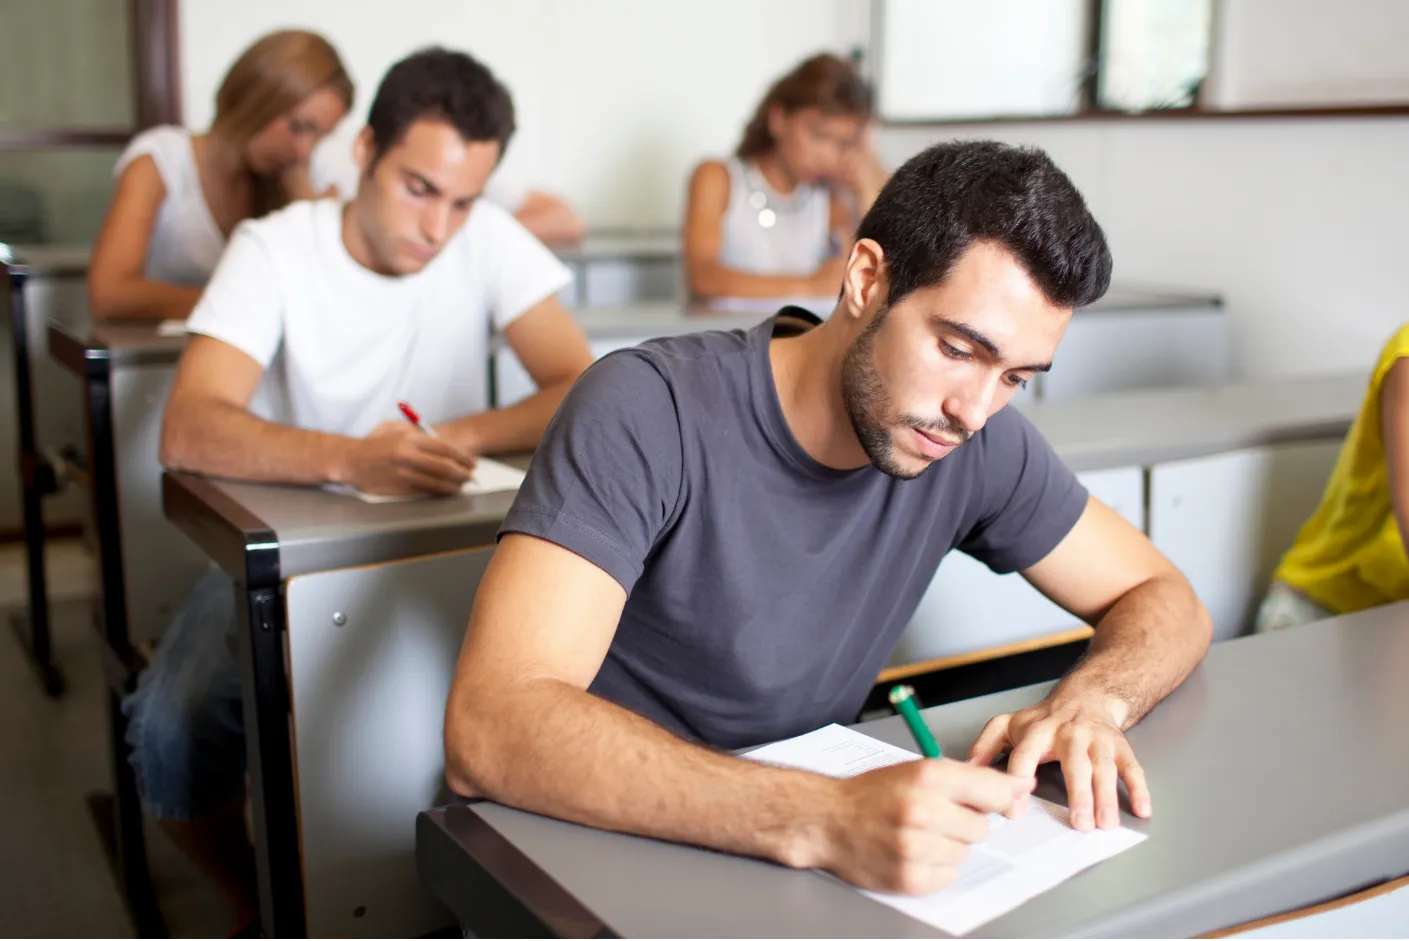 Here is Study guide of CCAT test (Criteria Cognitive Aptitude Test) in the United Kingdom